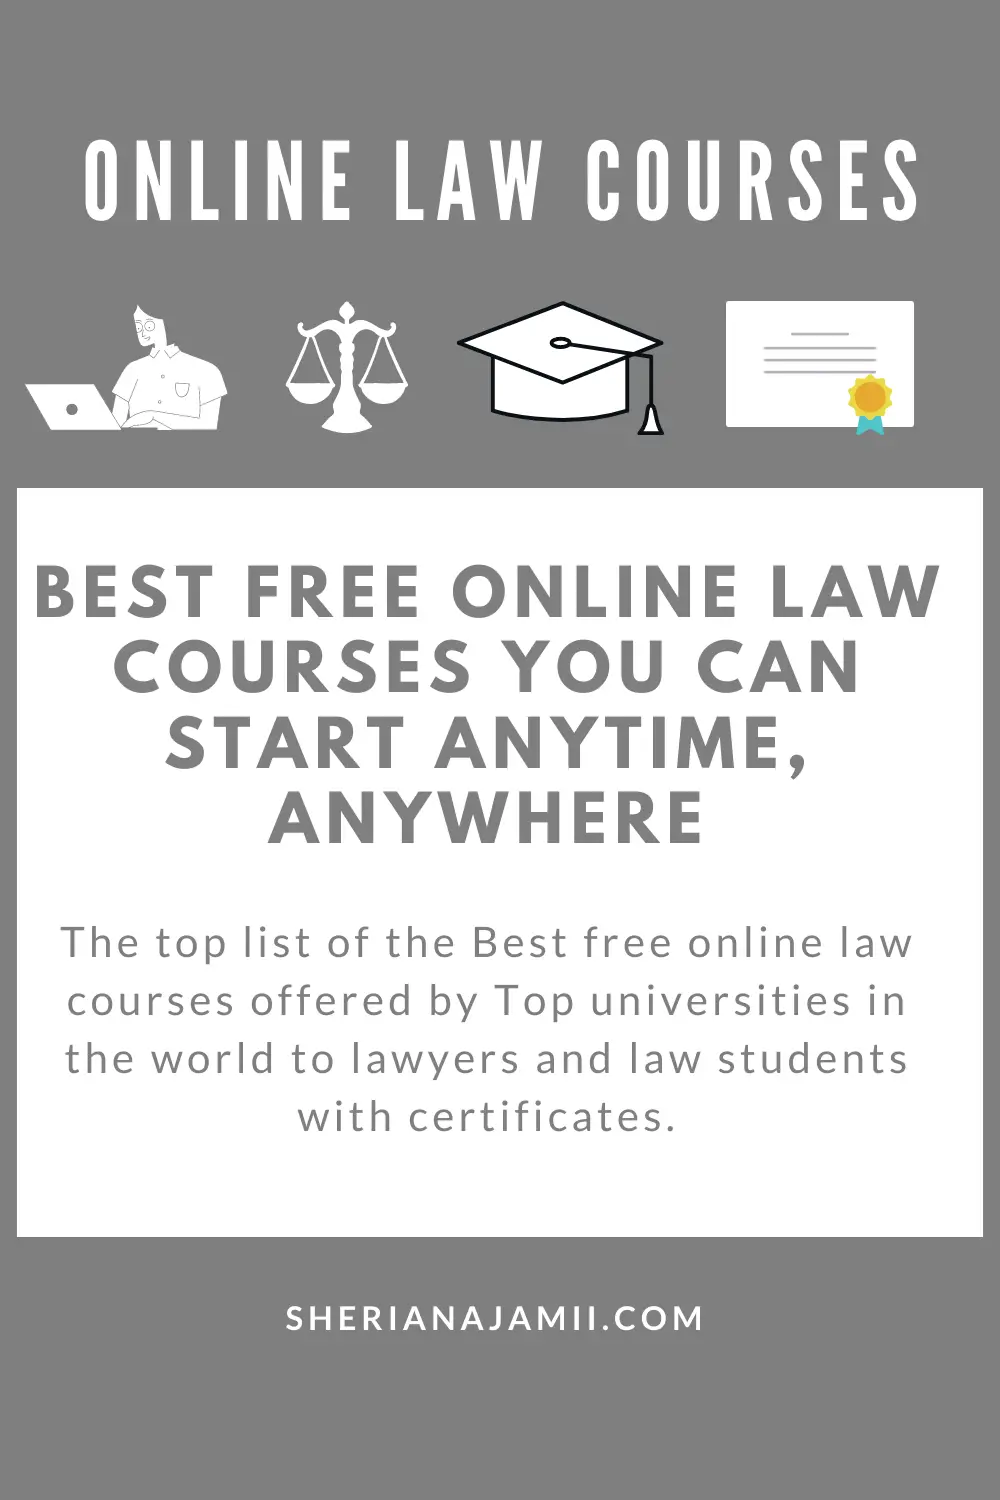 free online law courses, Best online law courses, online law courses with certificates